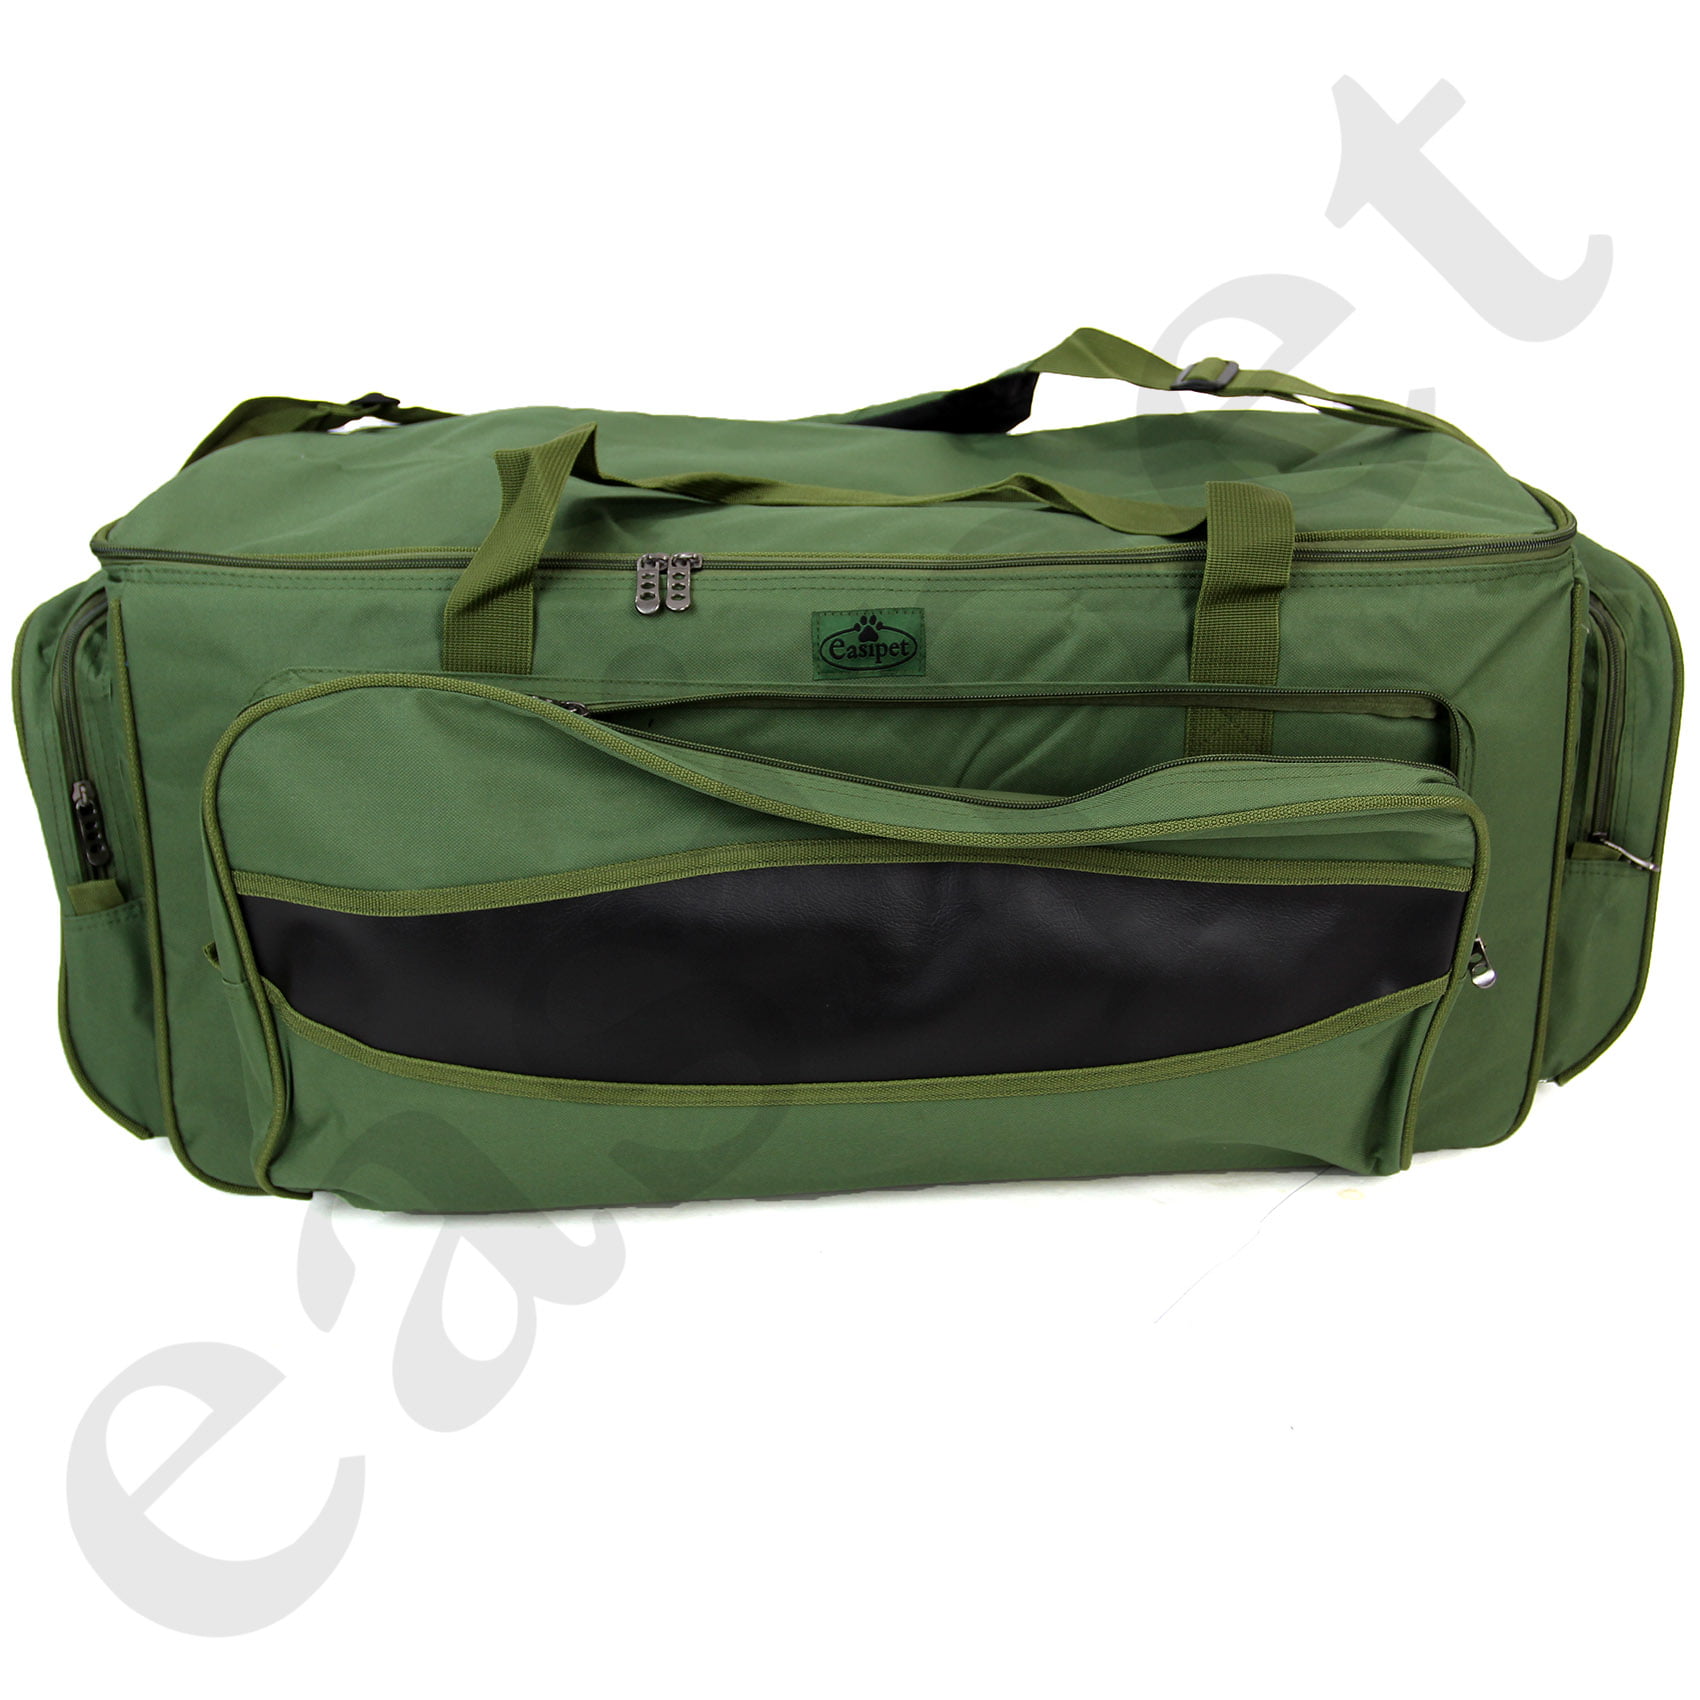 Large NEW CAMO XXL Carp Fishing Camping Insulated Waterproof Tackle Carryall Bag 